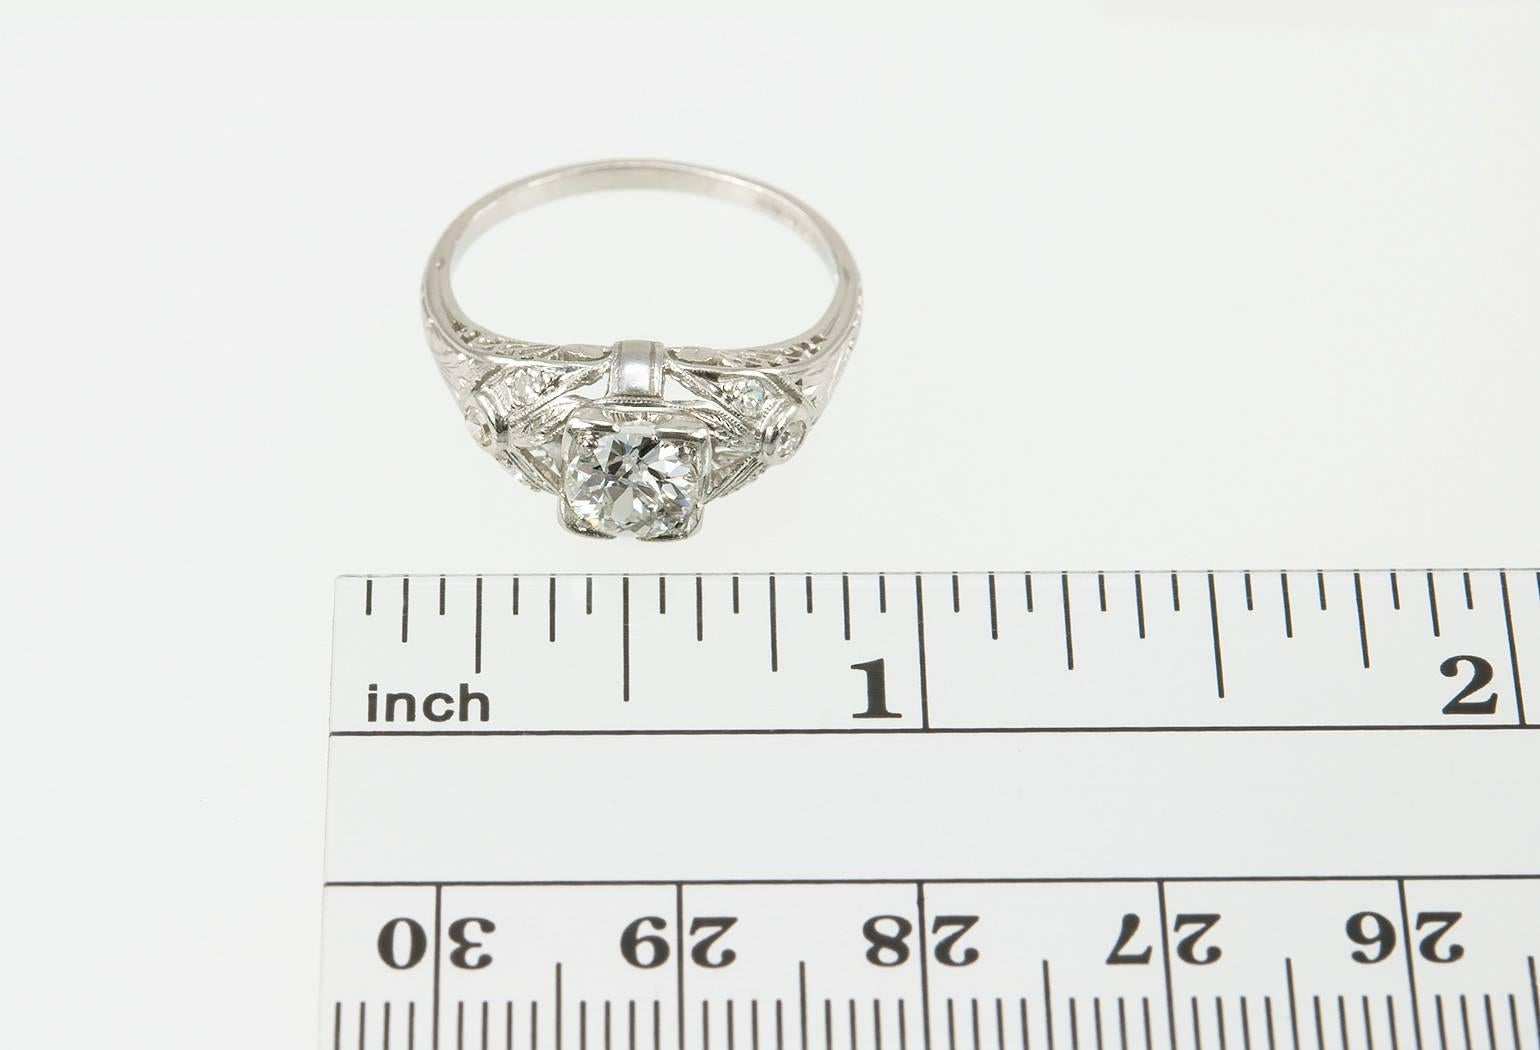 This vintage Art Deco platinum and diamond engagement ring features a 0.64 carat Old European Cut diamond in the center that is G in color and VS2 in clarity (per EGL certificate). The ring is further accented with an additional 6 side diamonds that